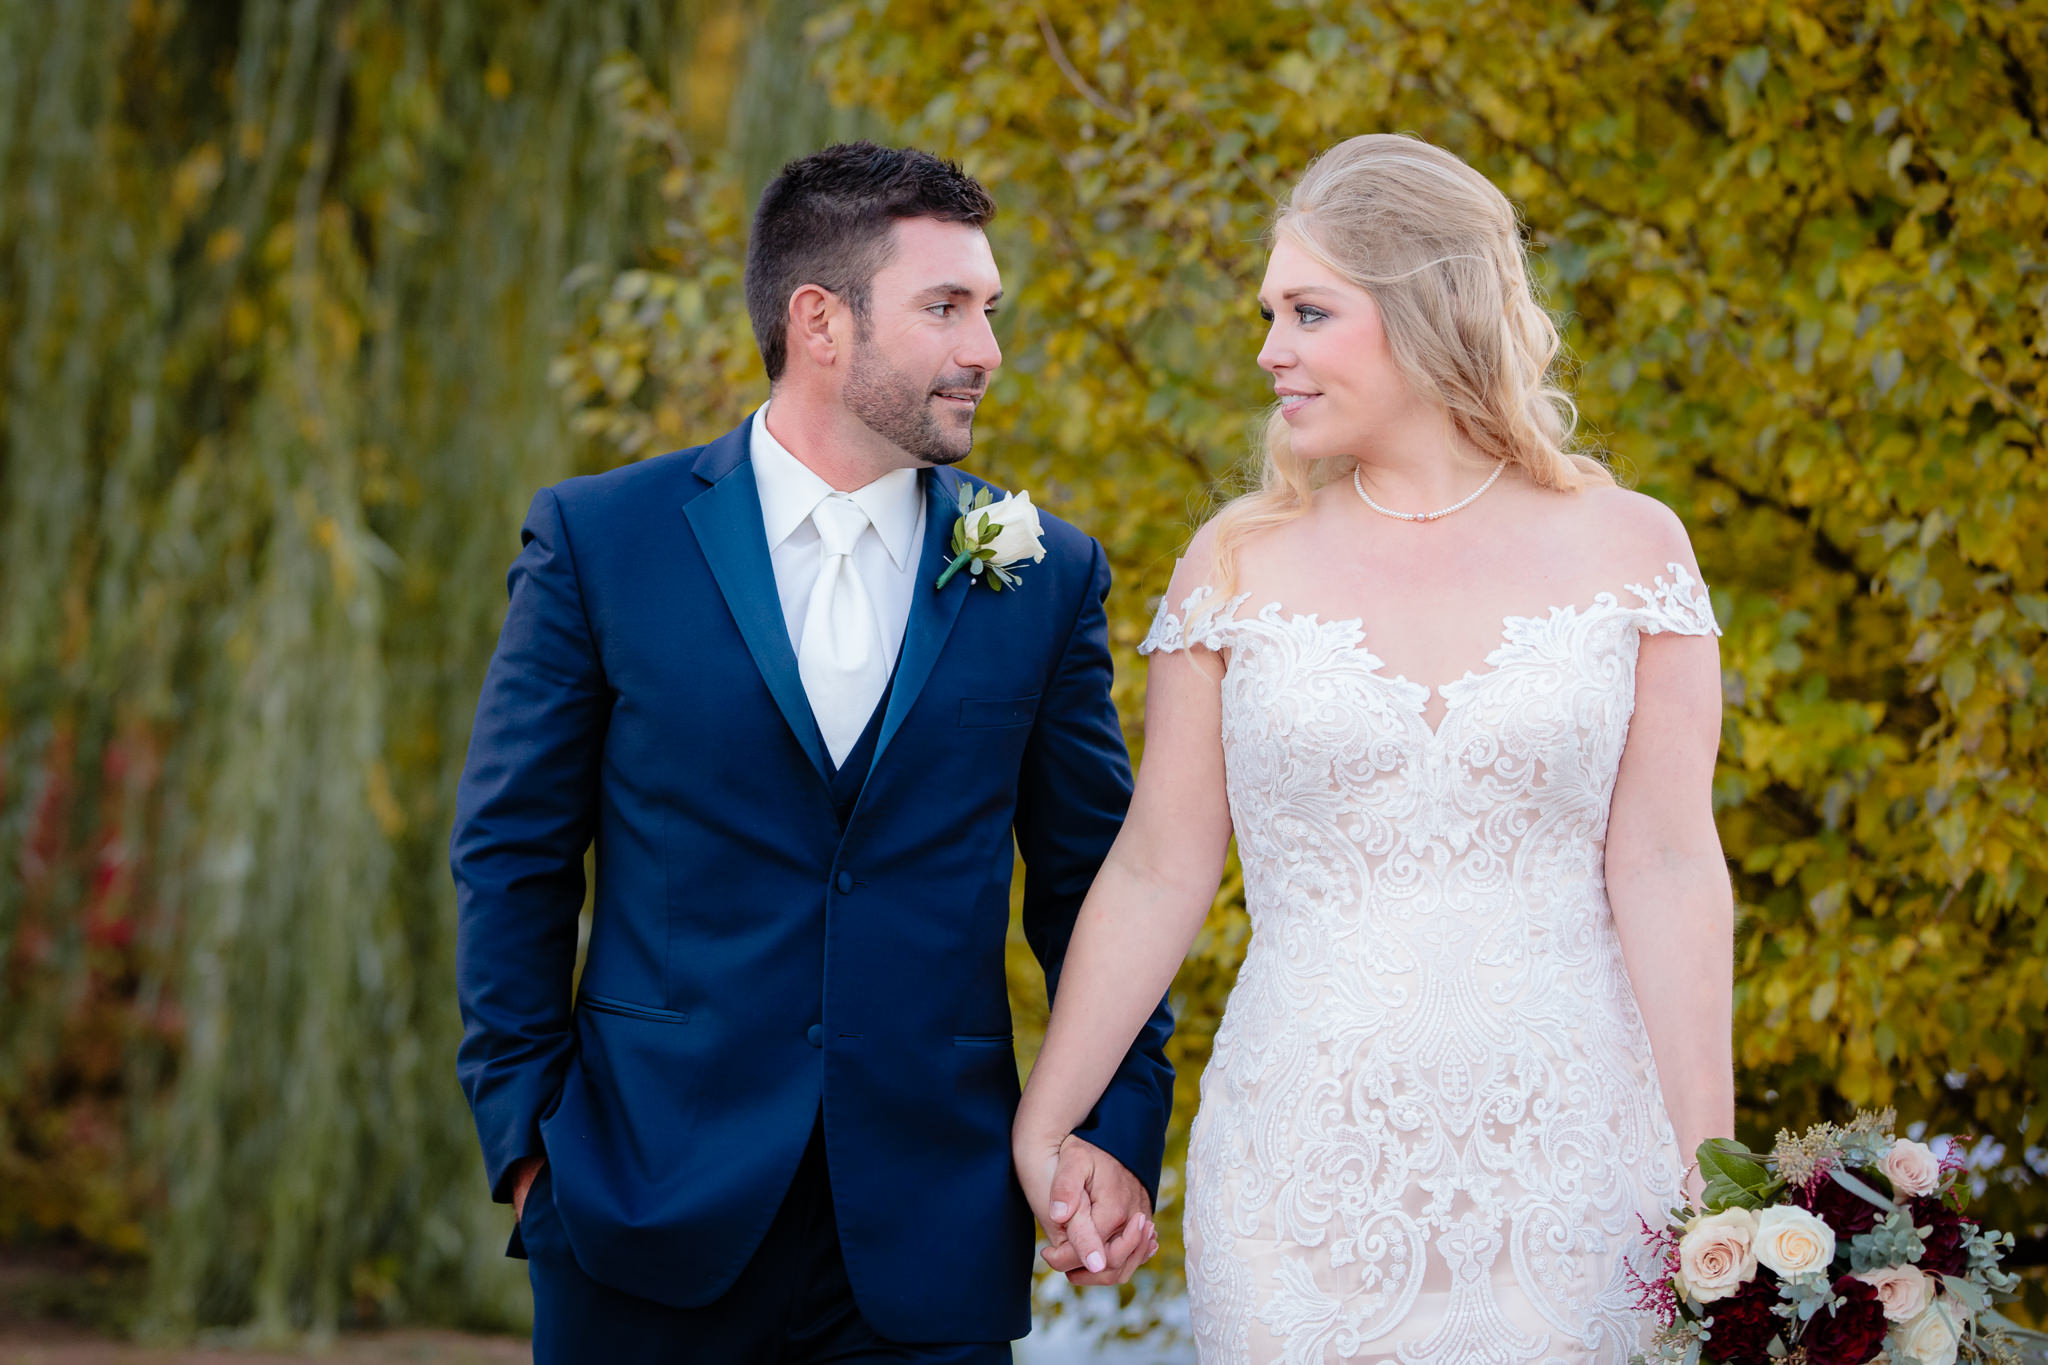 Bride and groom walk together to their Riverside Landing wedding reception